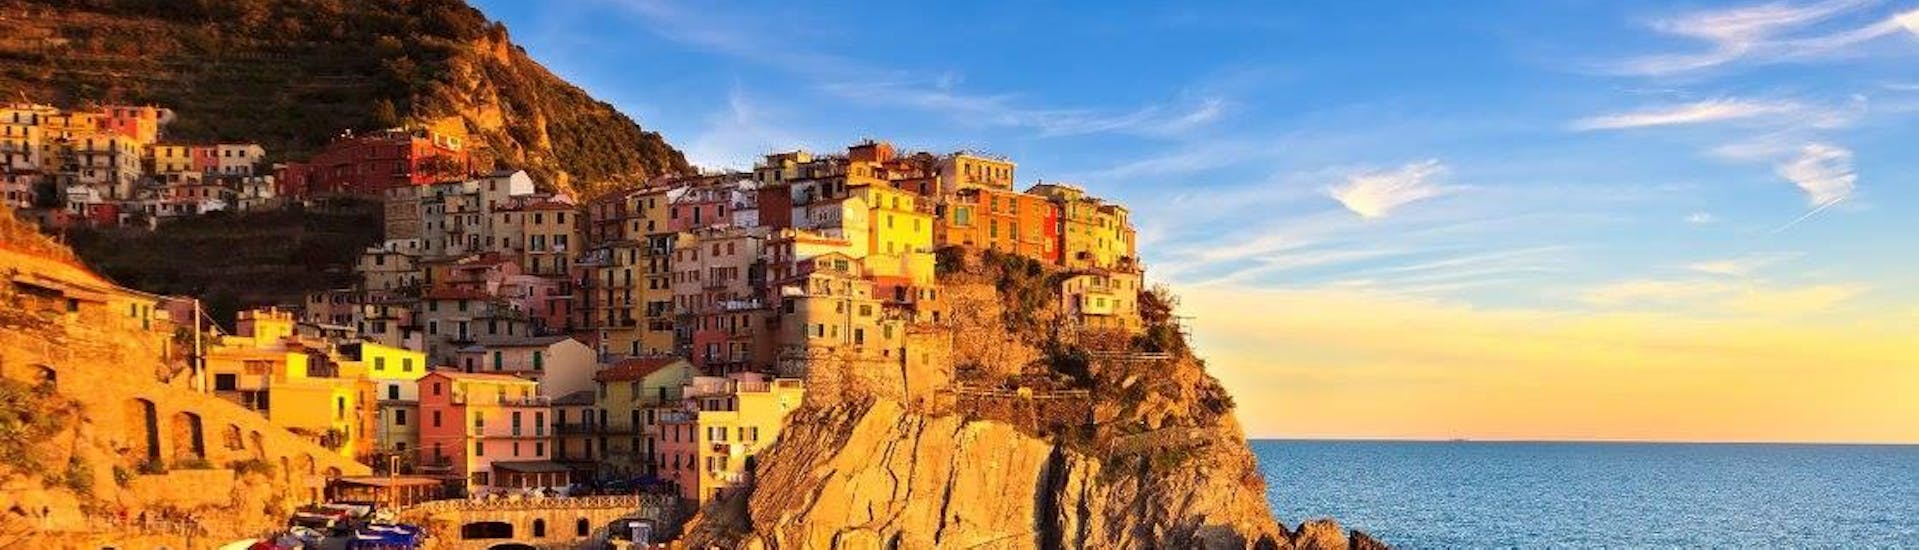 The beautiful village of Manarola that you can admire during the sunset boat trip from Levanto to Cinque Terre with Costa di Faraggiana Levanto.